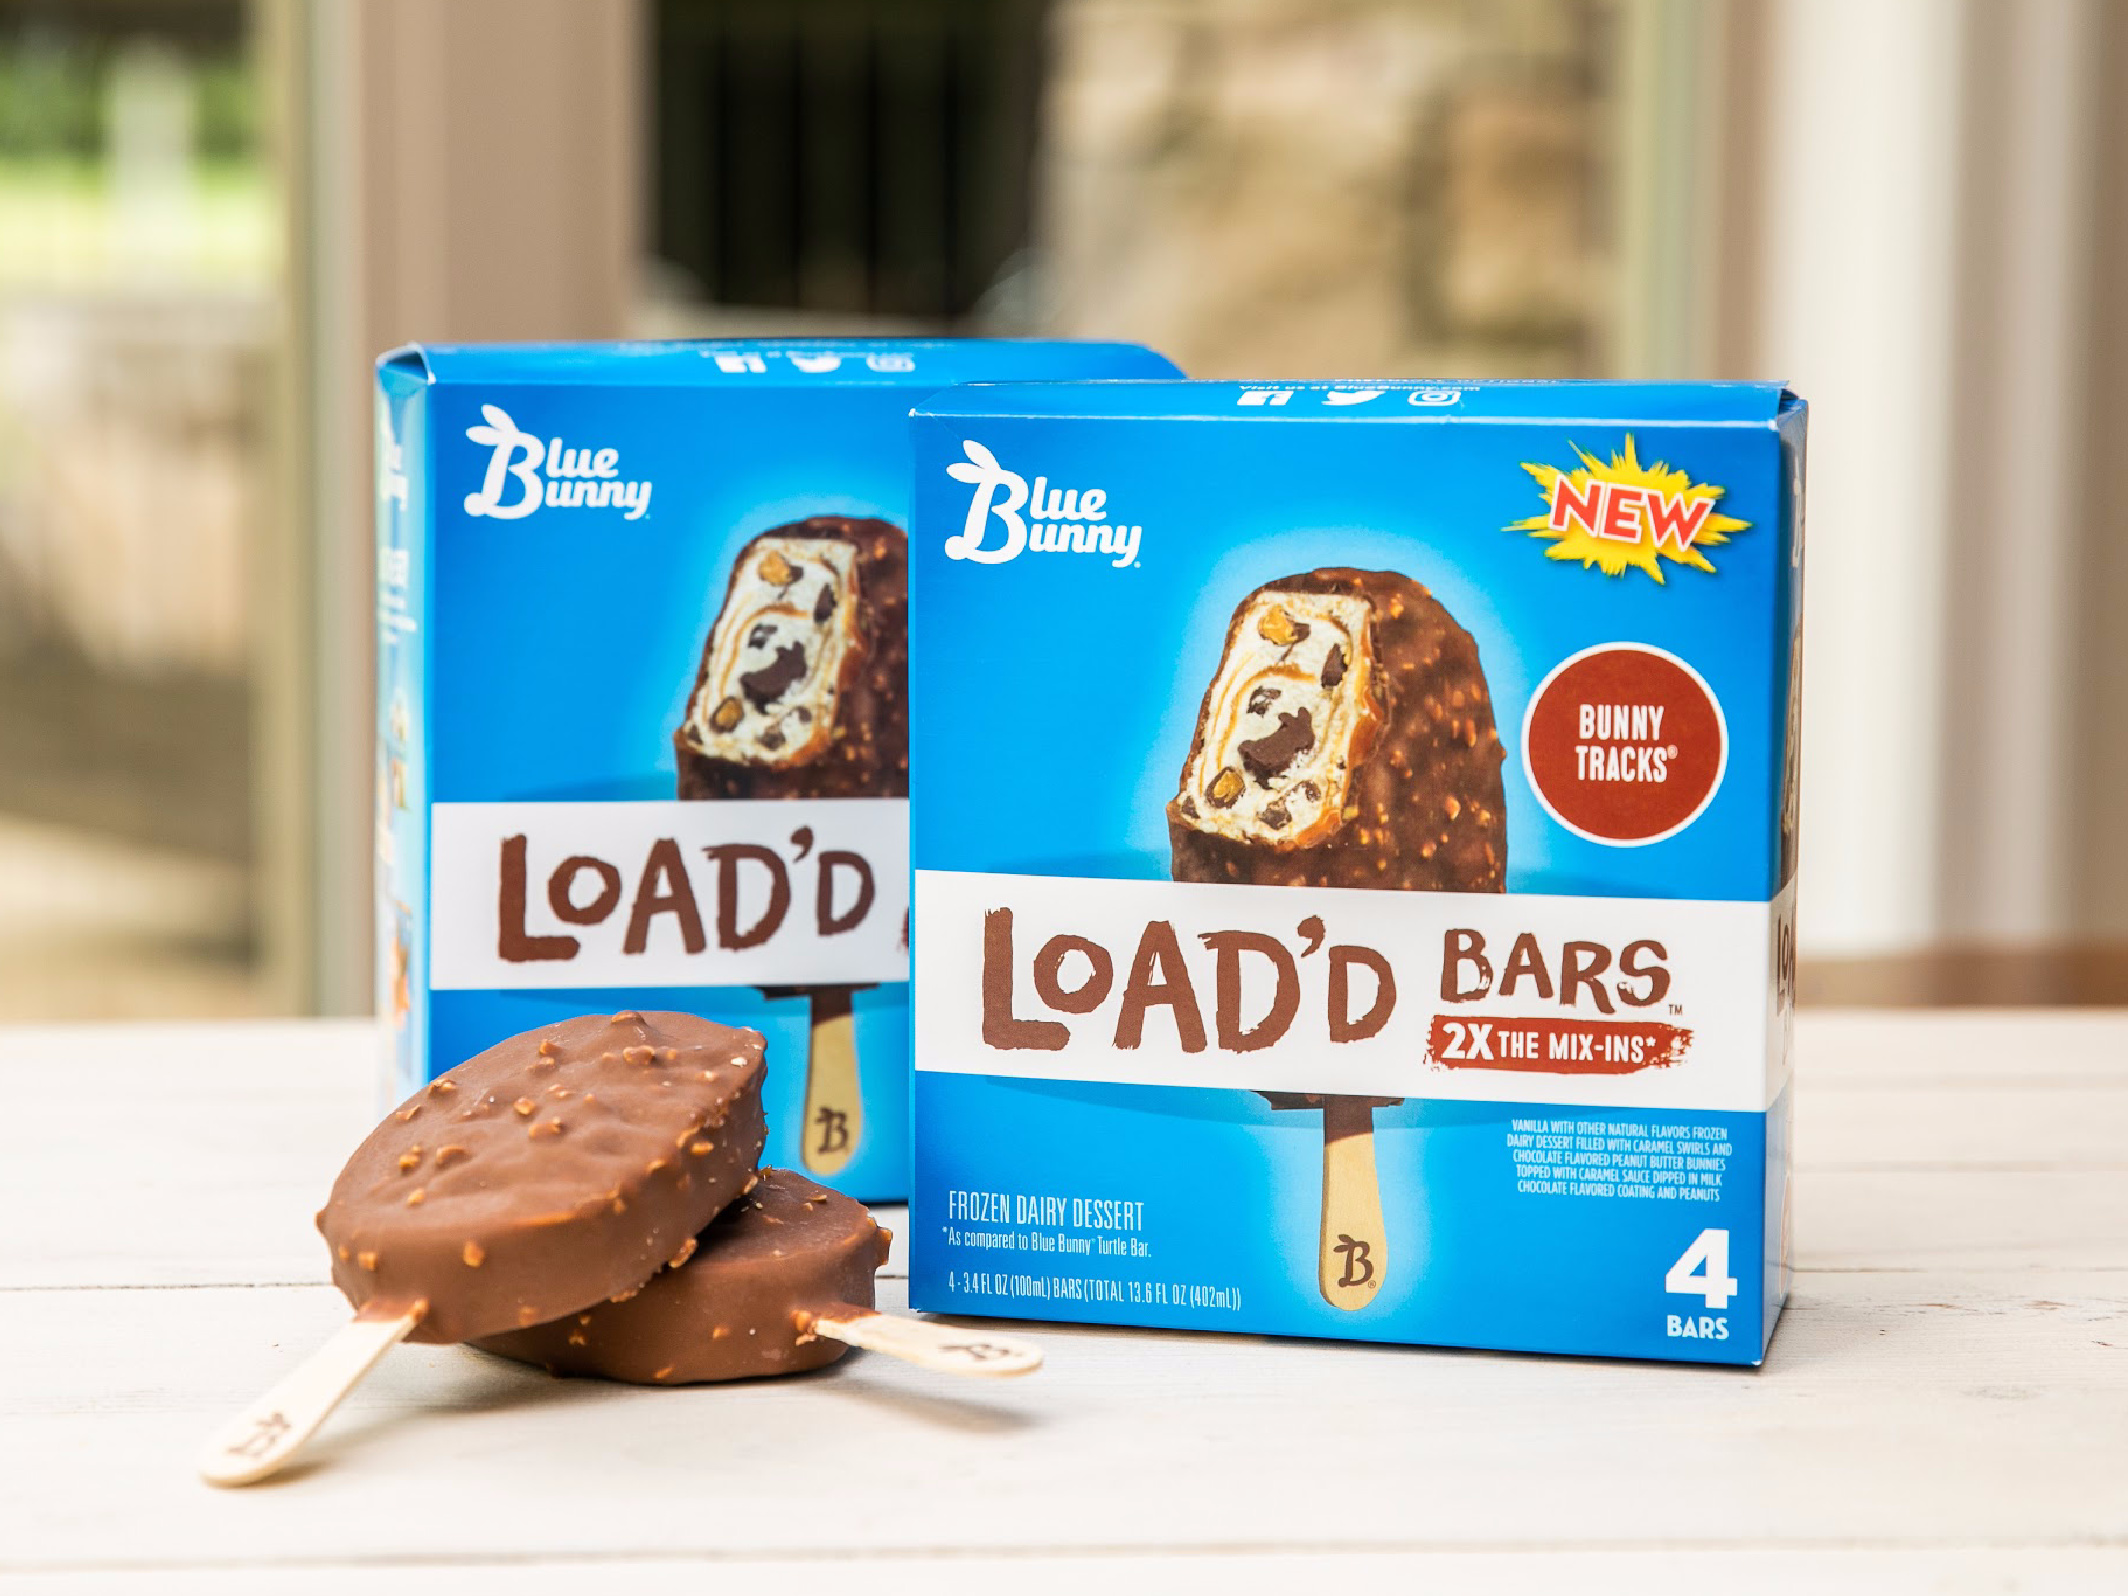 Stock Your Freezer With The Great Taste Of Blue Bunny Frozen Treats & Try New Blue Bunny Load’d Bars™ on I Heart Publix 1